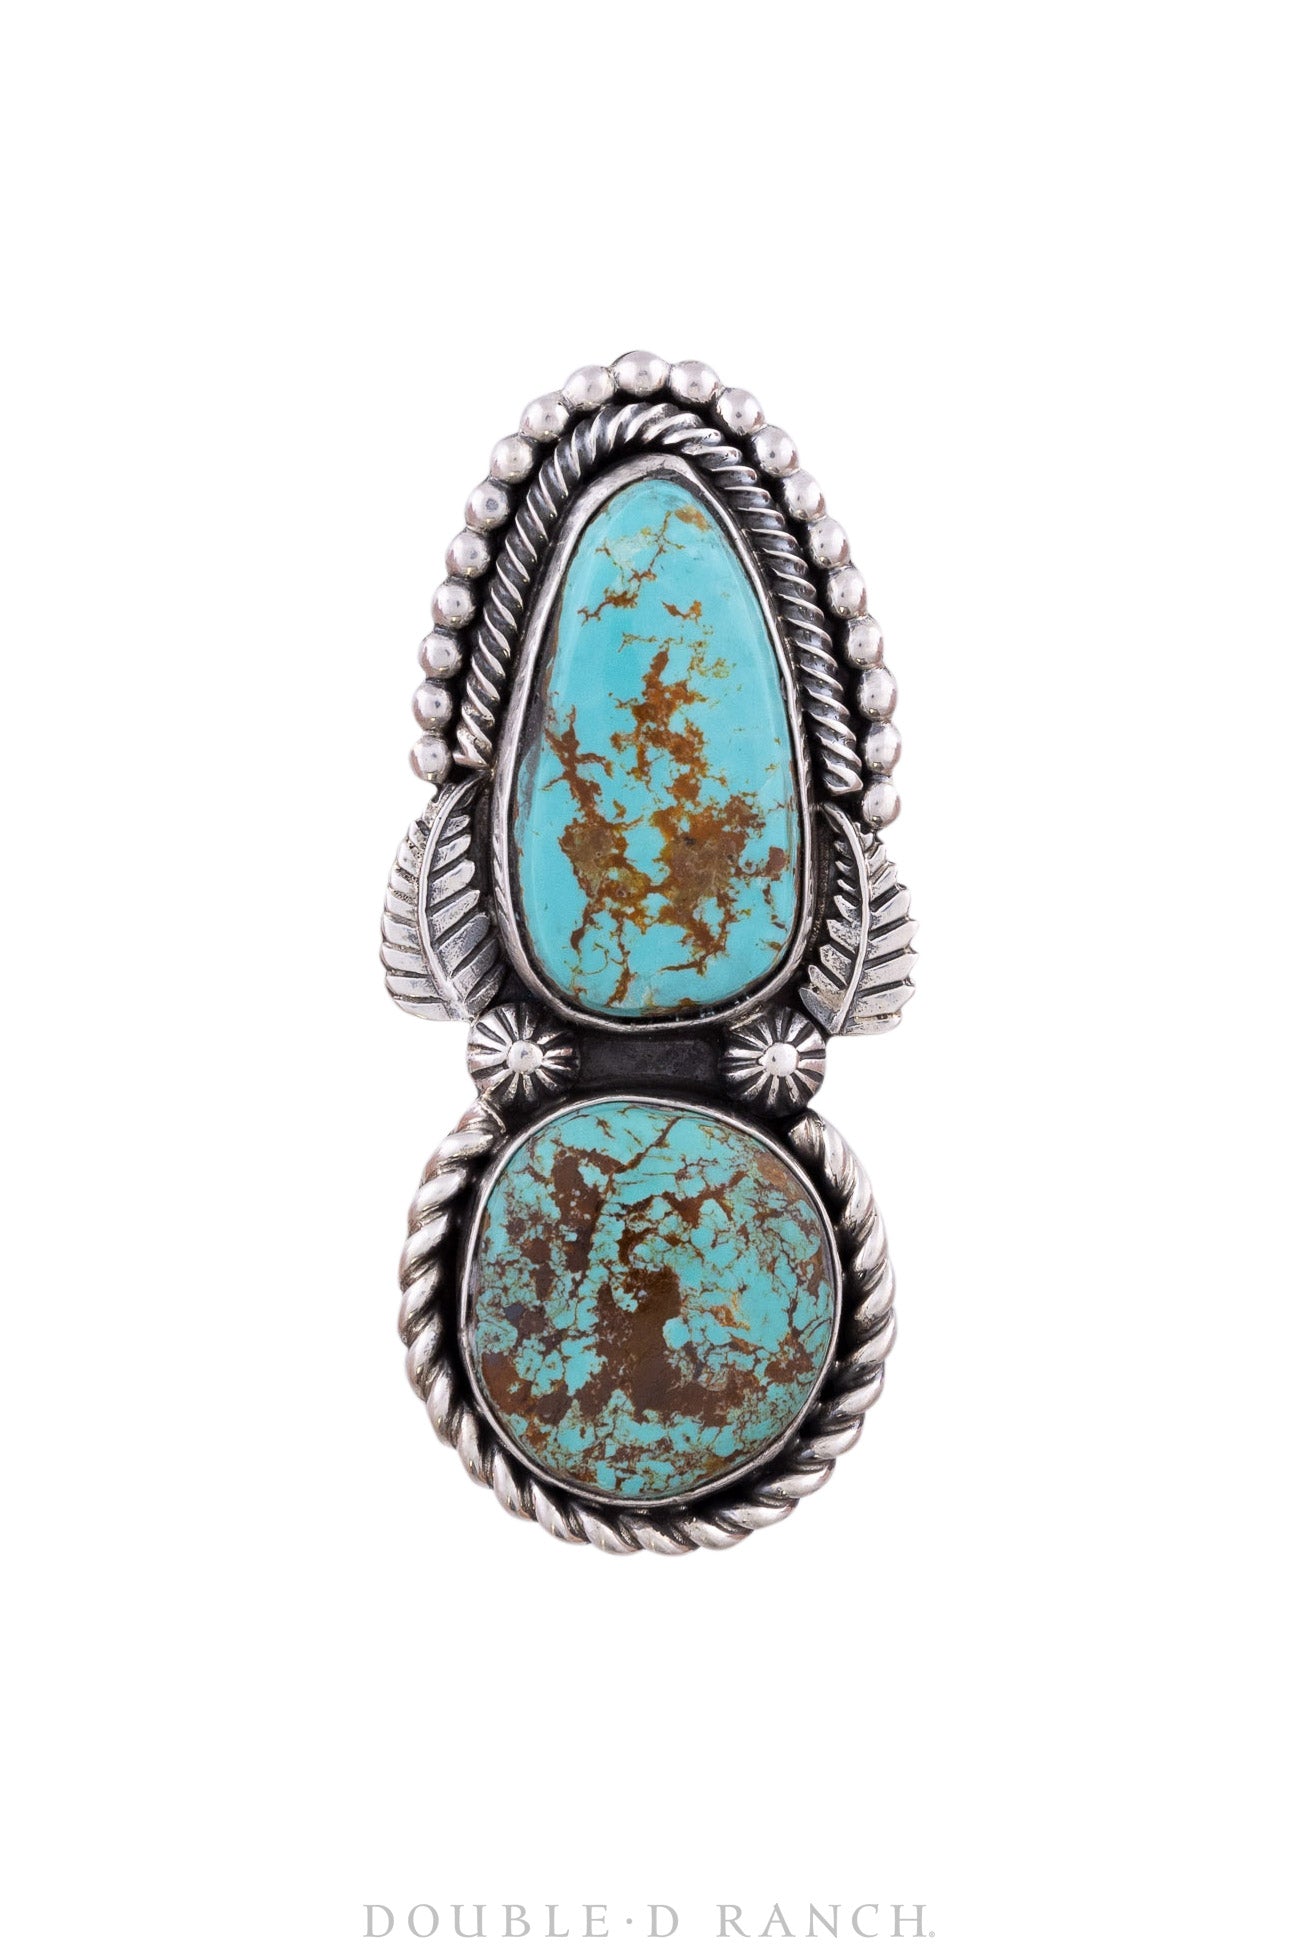 Ring, Turquoise, Double Stone, Statement, Hallmark, Contemporary, 960